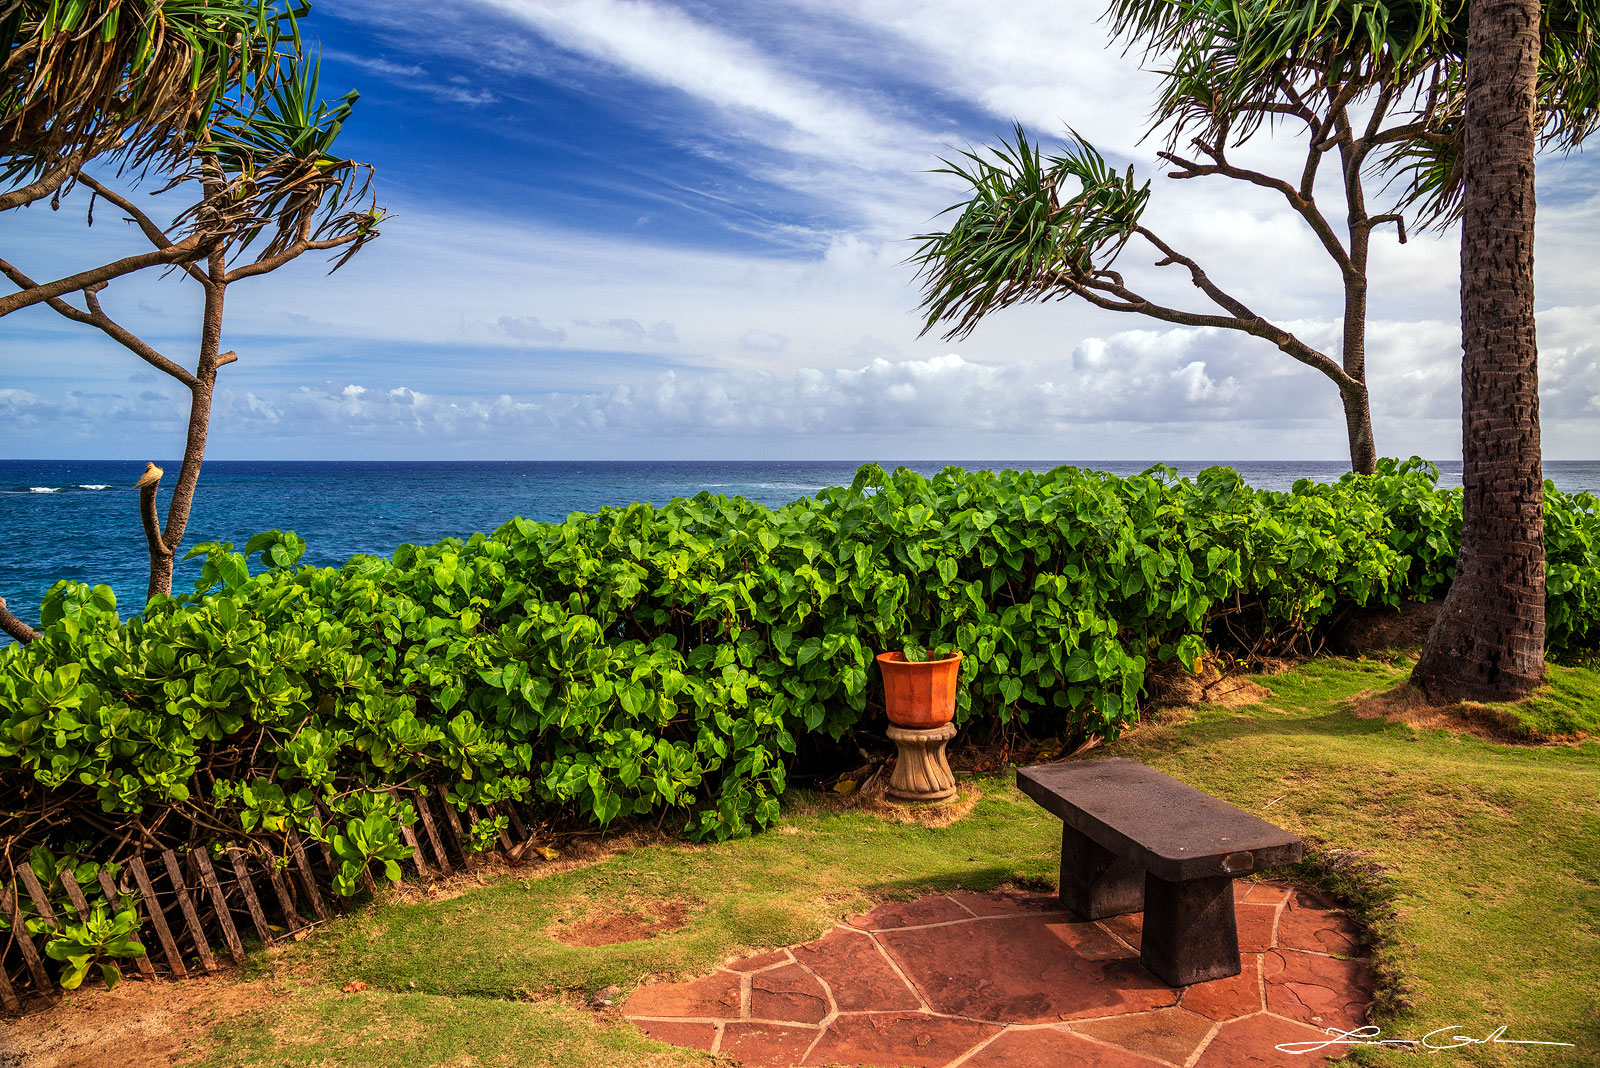 Shoreside Solace - A captivating fine art photo art print capturing an ocean view bench in Maui, adorned by a natural fence of lush green leaf plants. Palm trees sway in the tropical breeze as the deep blue ocean water glistens under the midday sun. White clouds adorn the vibrant blue sky, creating a serene atmosphere. Find solace in this mesmerizing scene. - Gintchin Fine Art